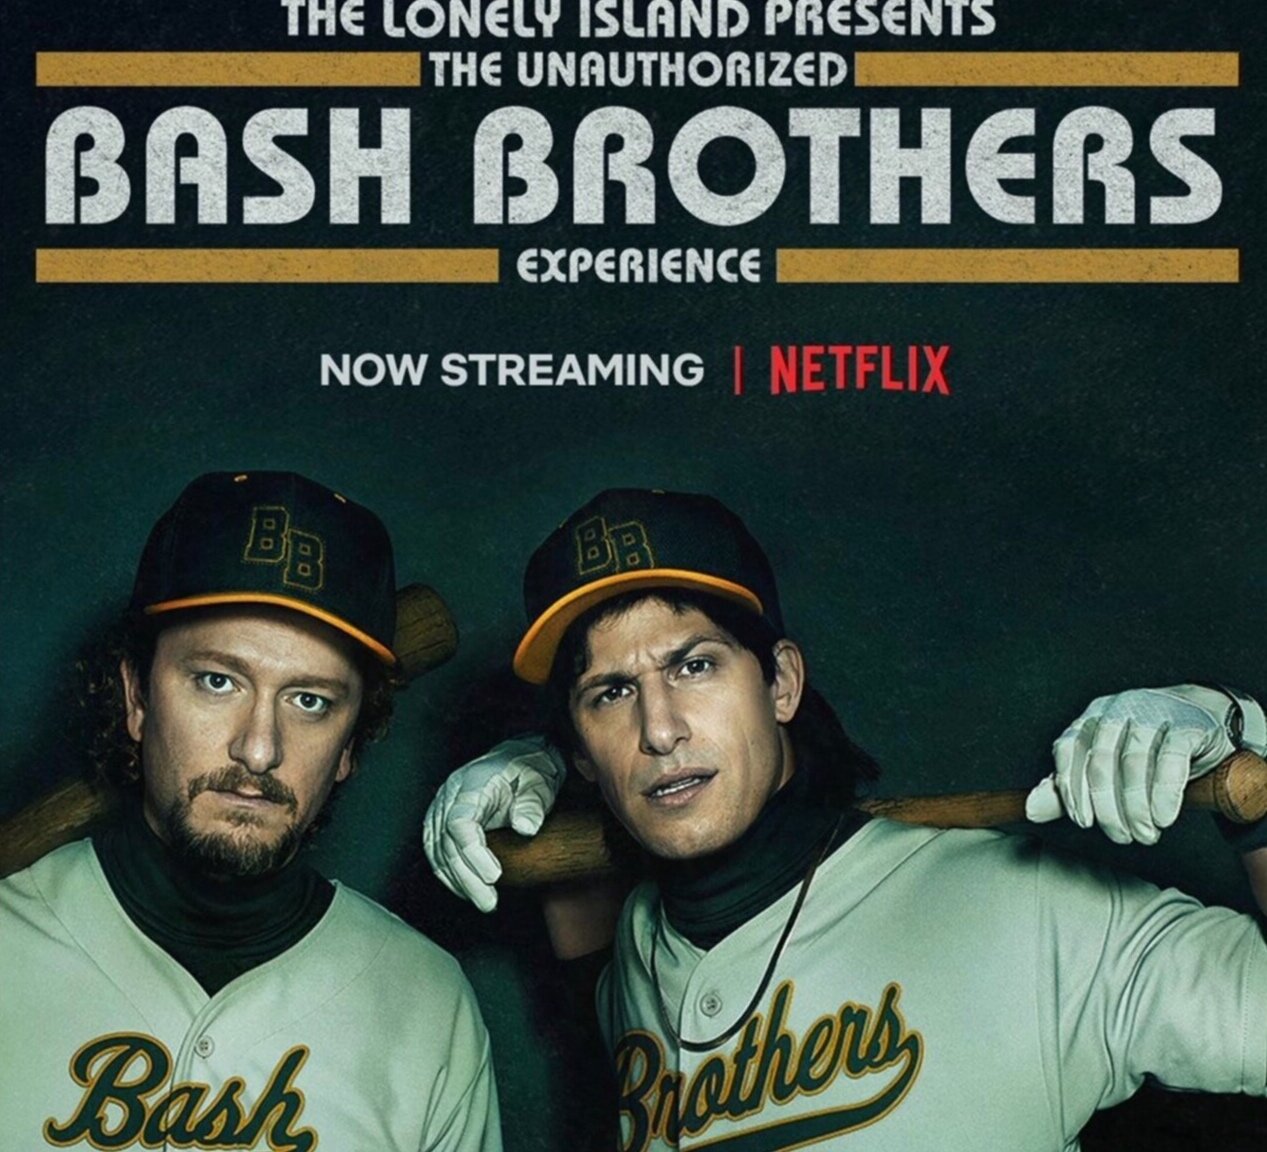 The Lonely Island Presents: The Unauthorized Bash Brothers